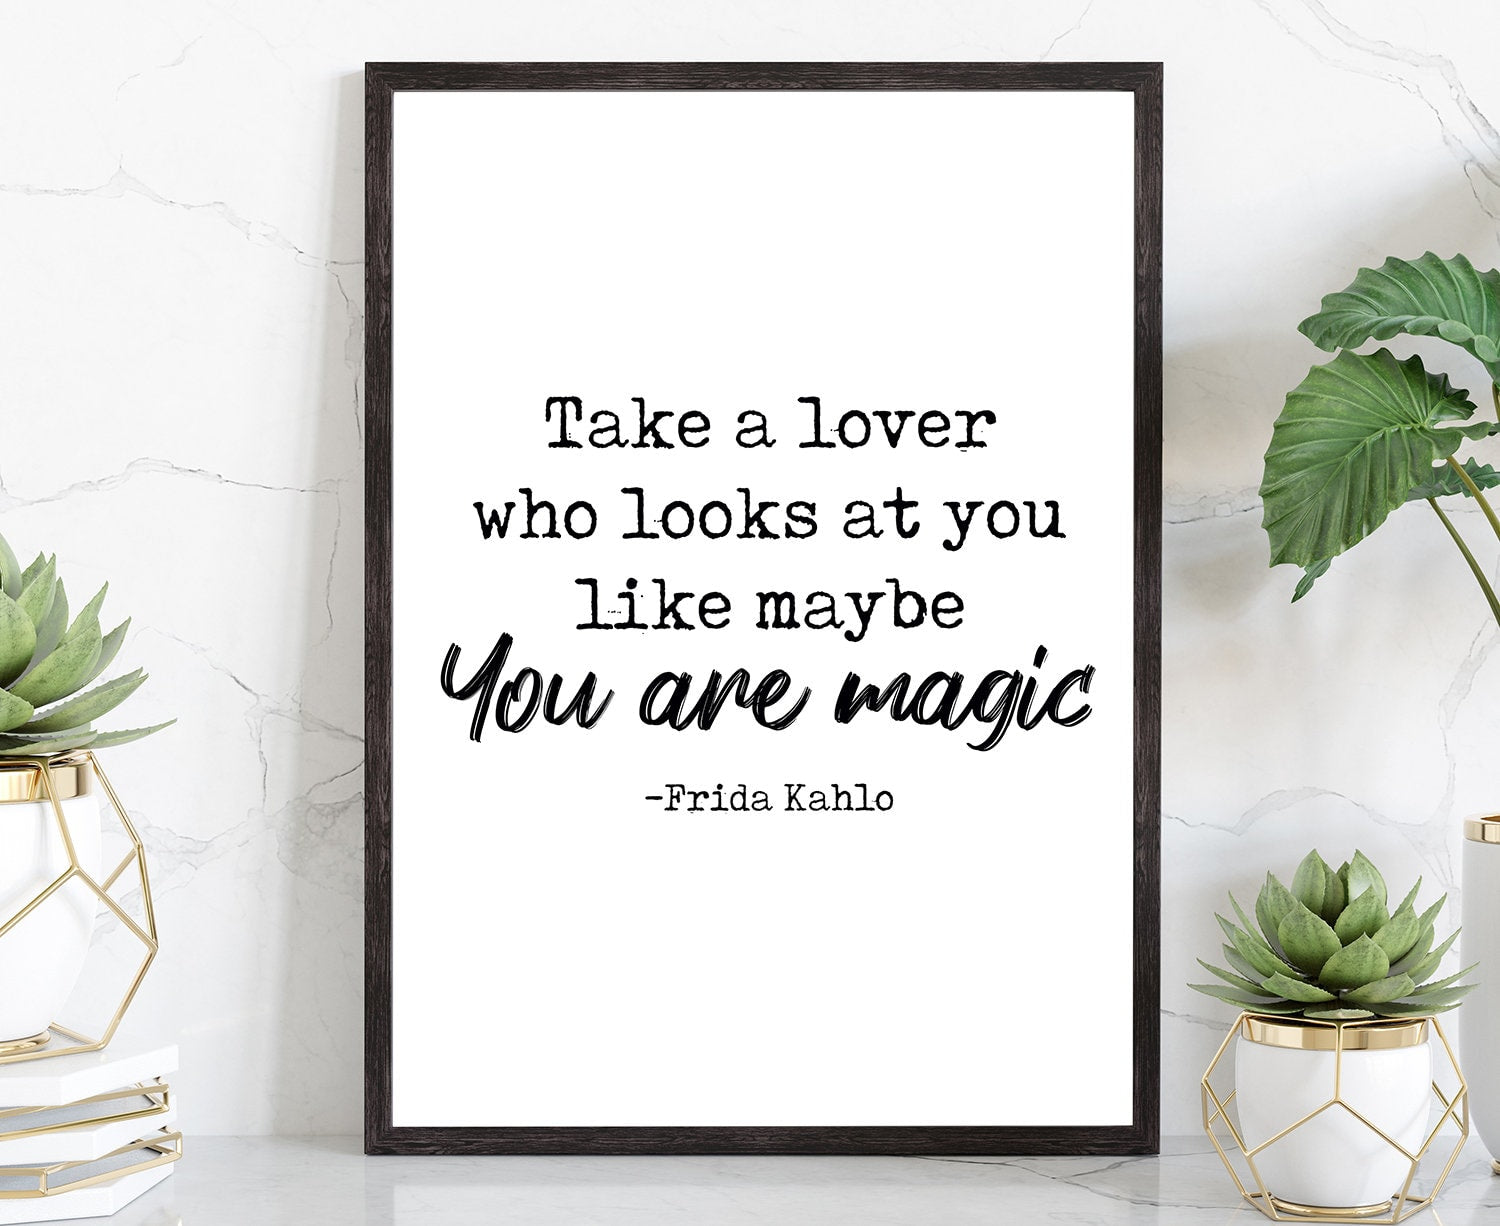 Take a Lover Who.. Frida kahlo quotes, Poster prints, Inspirational quote prints, Motivational quote posters, Home wall art, Room wall arts